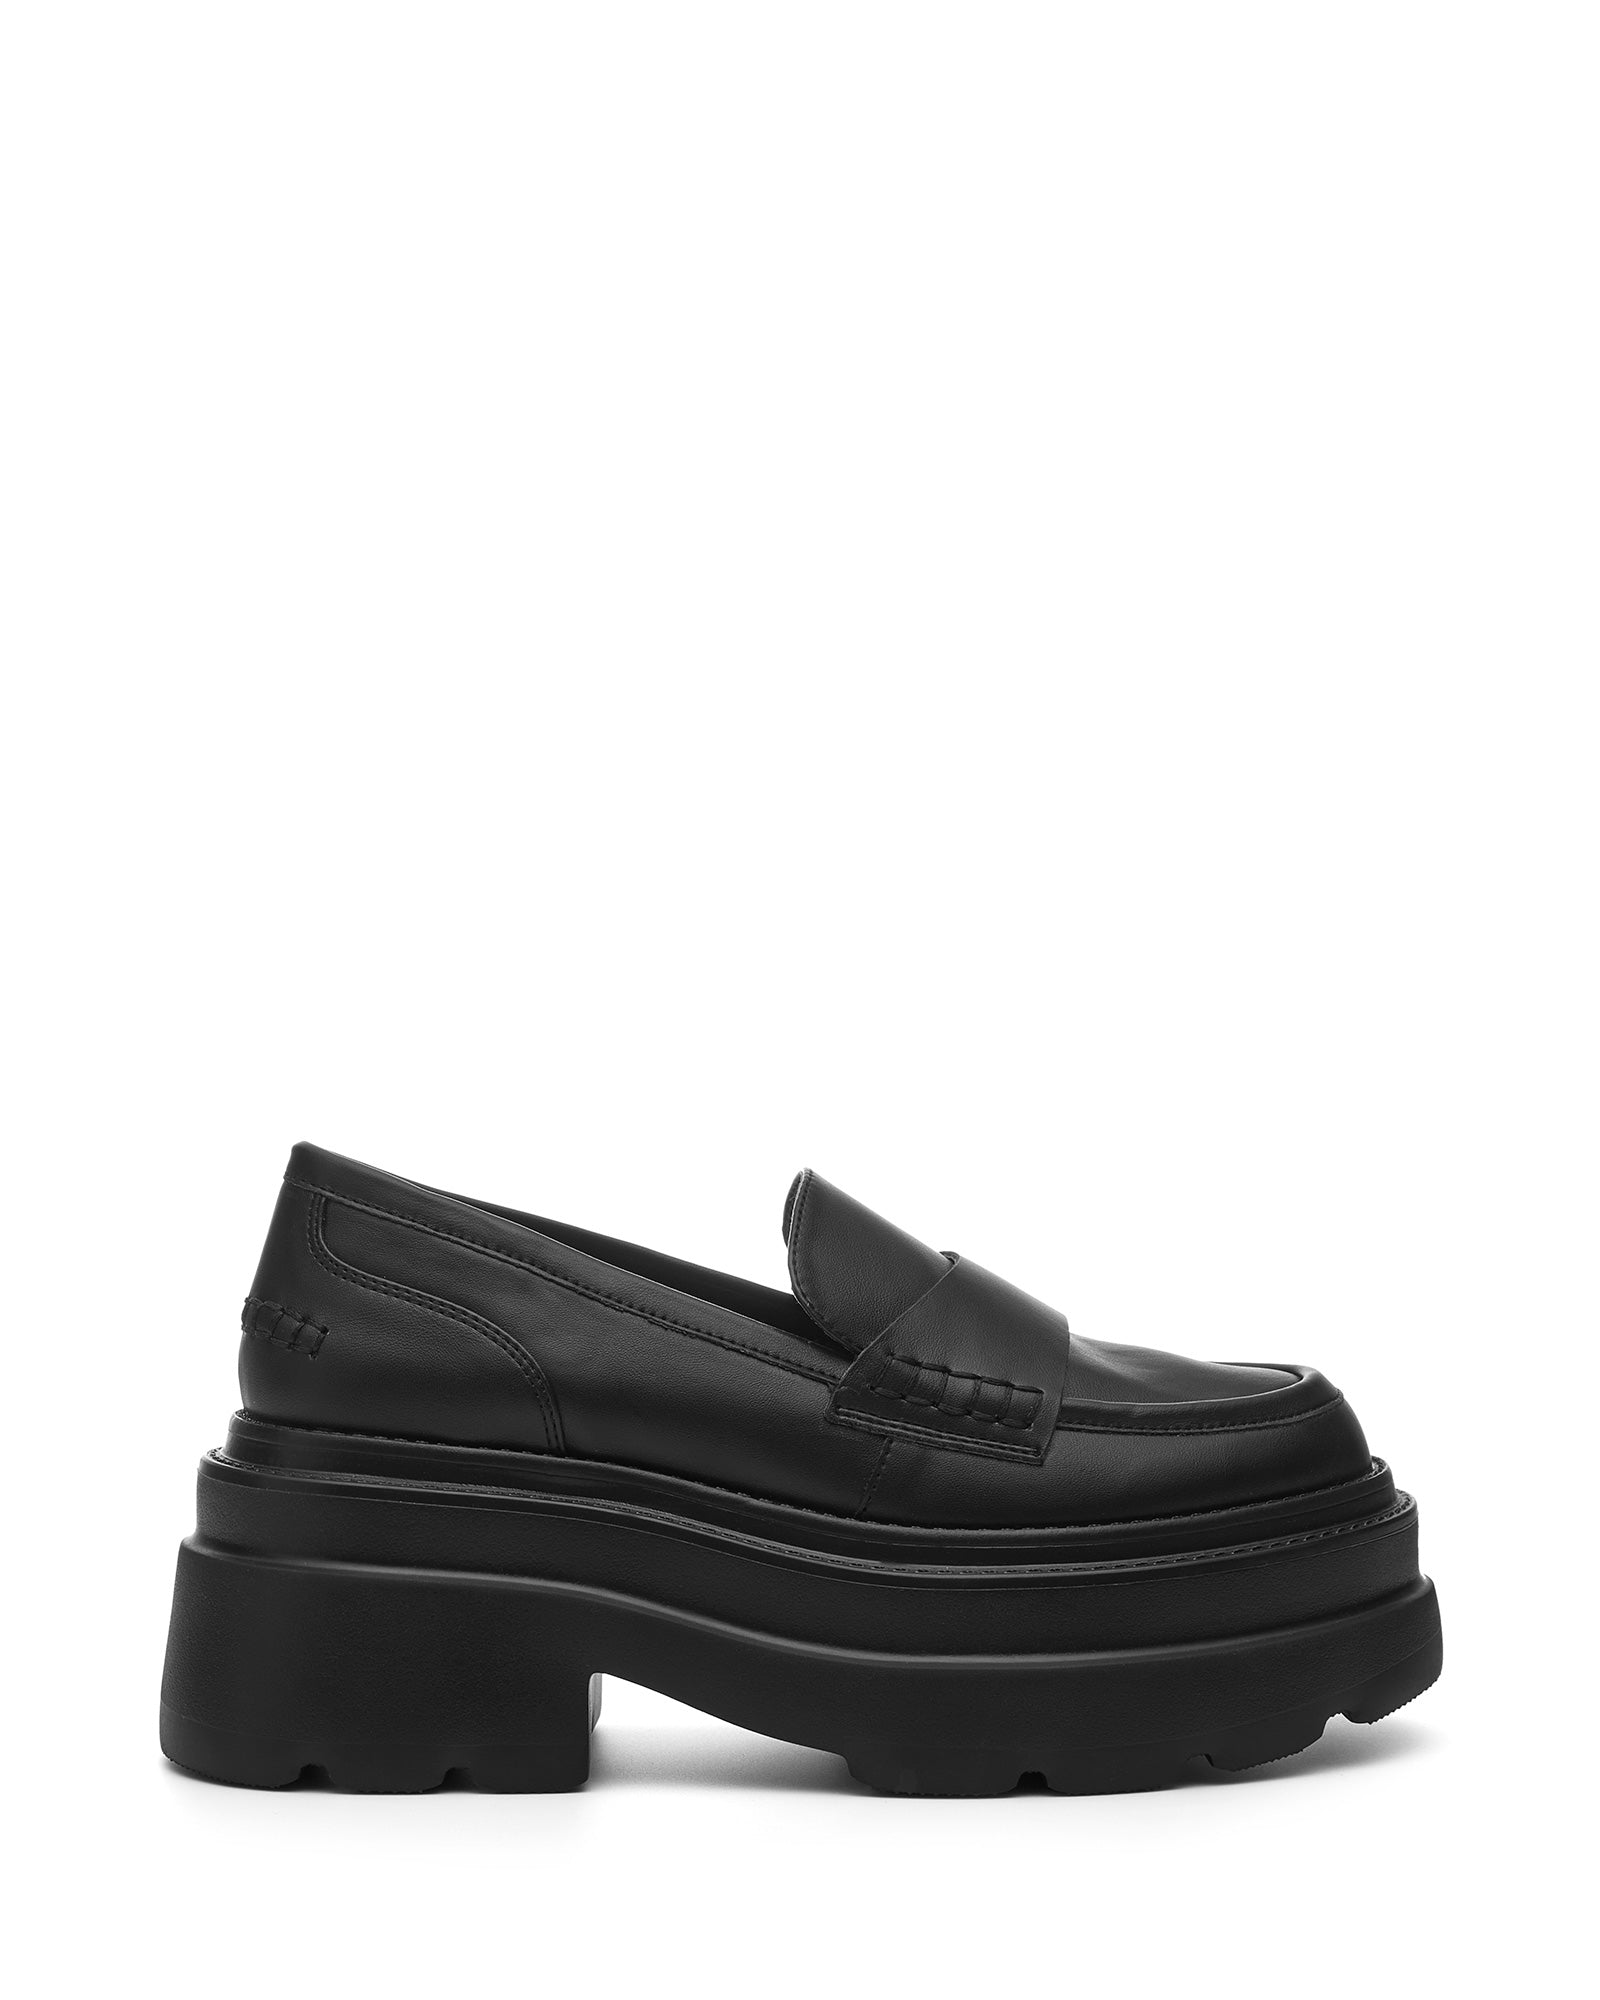 Therapy Shoes Ranked Black Smooth | Women's Loafers | Heels | Platform | Chunky